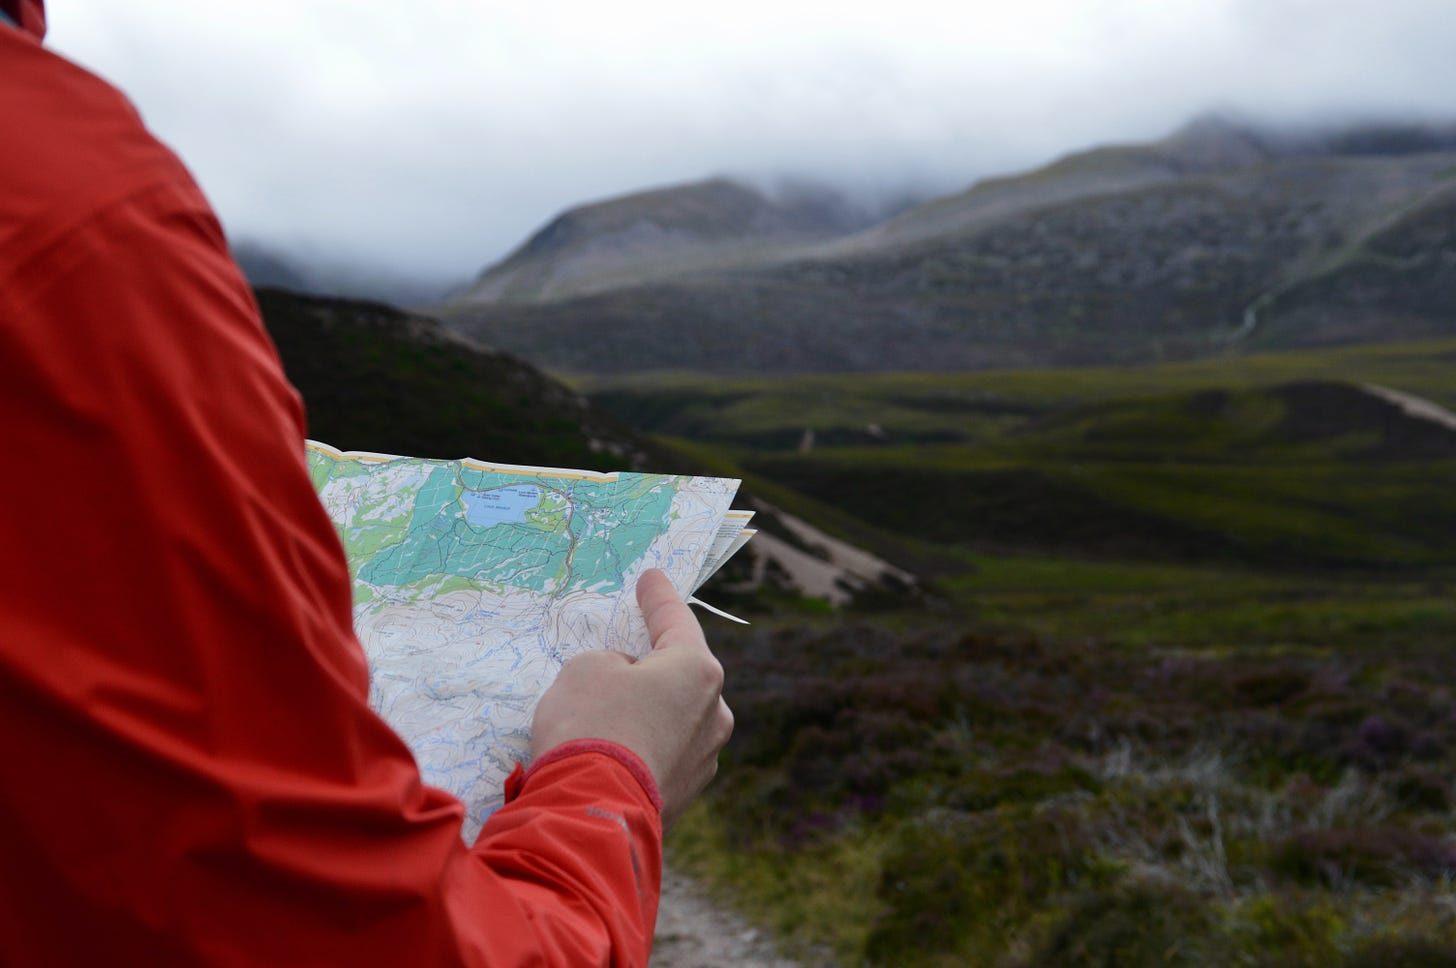 A person viewing an OS map of the Cairngorm mountain range in Scotland